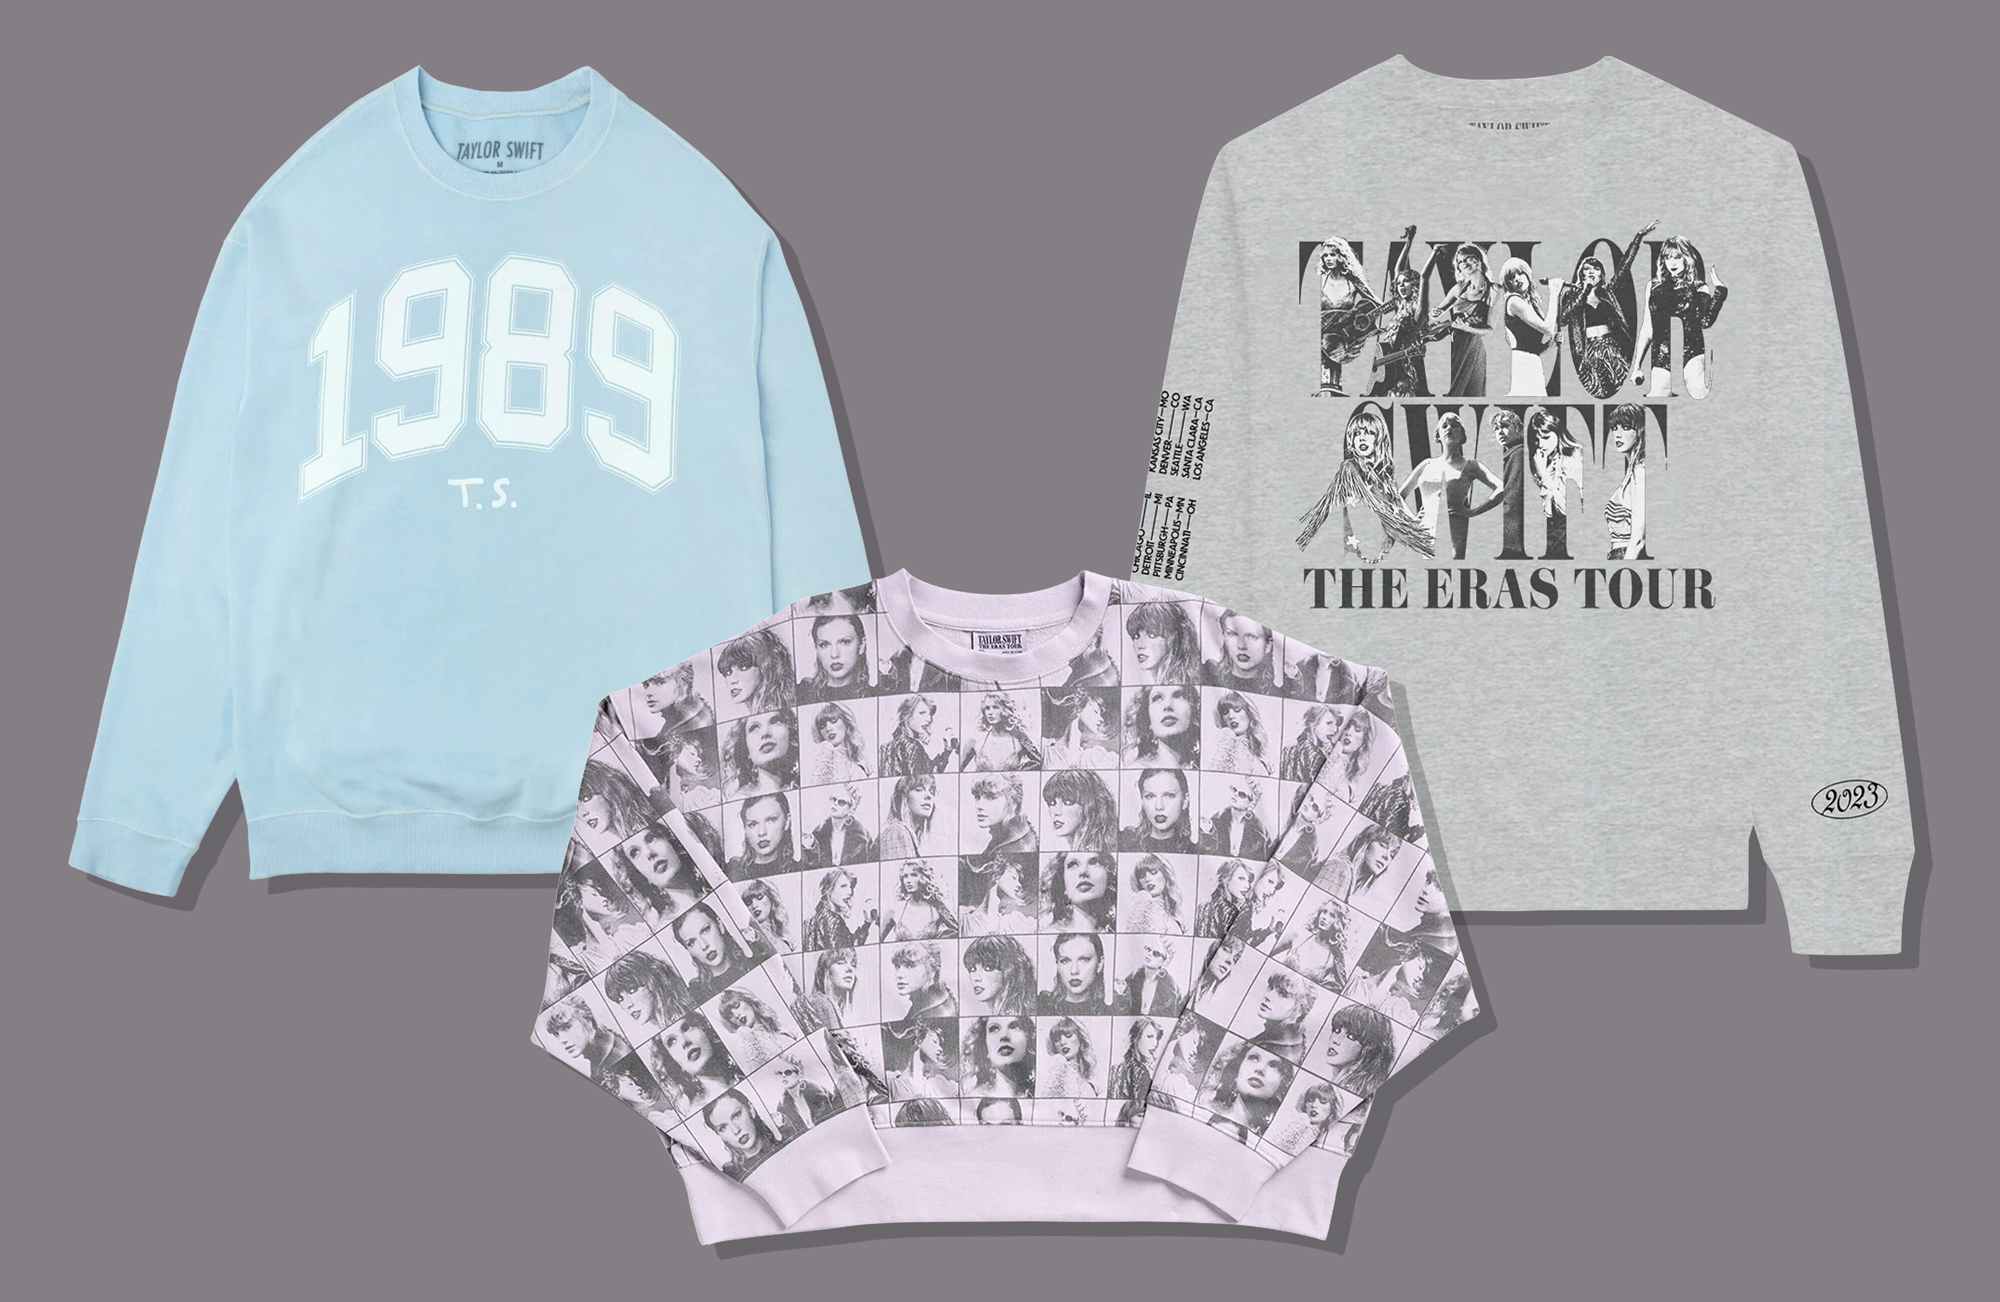 Taylor Swift merch drop: Where to buy, price, and more about the